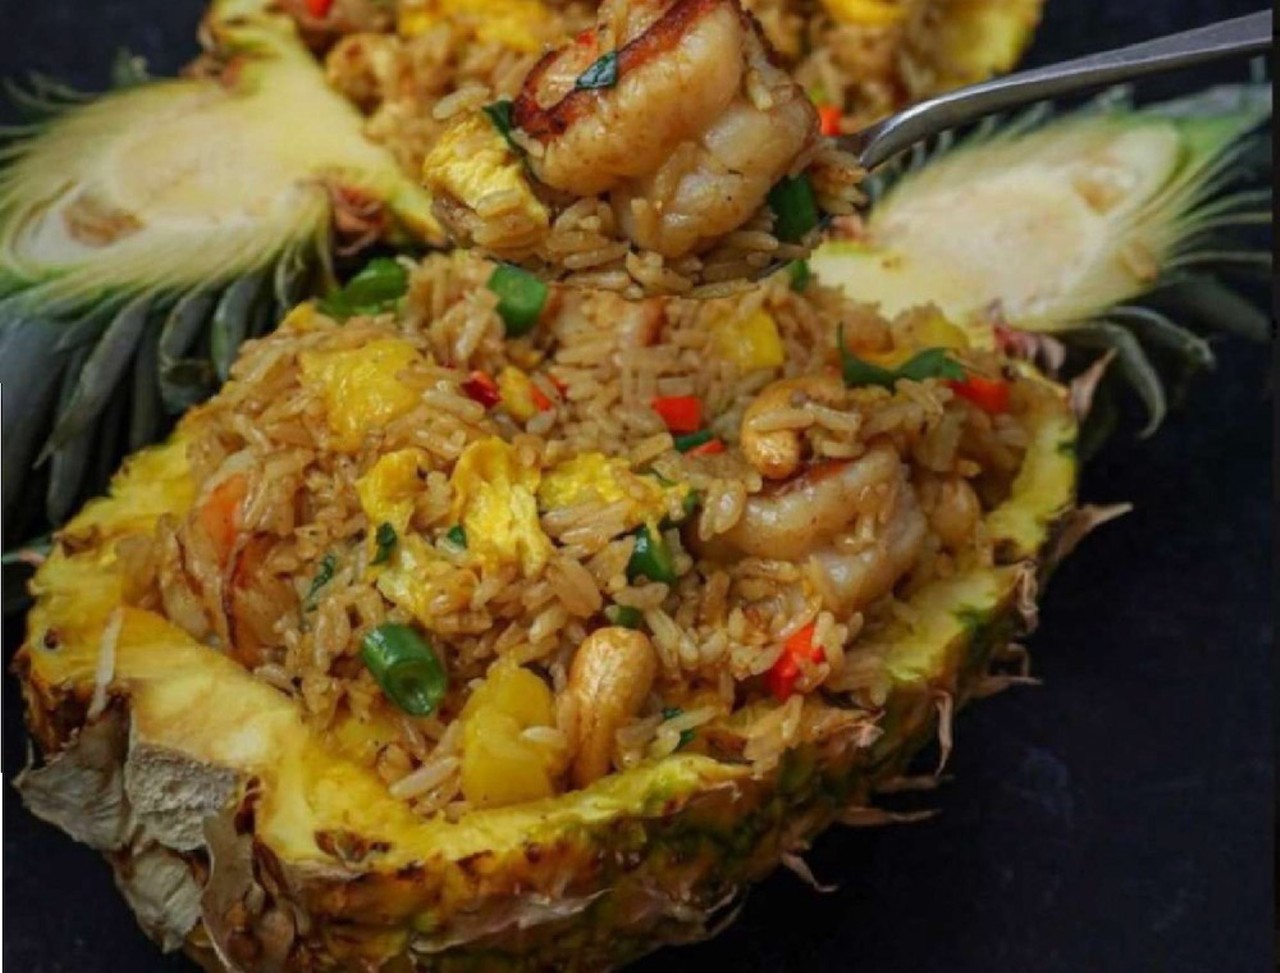 Pineapple Stir-Fried Rice Bowls           
"Fried-rice filled pineapple with your choice of steak, chicken or shrimp!"                      
Where to find it: Mobile Deserts & Foods